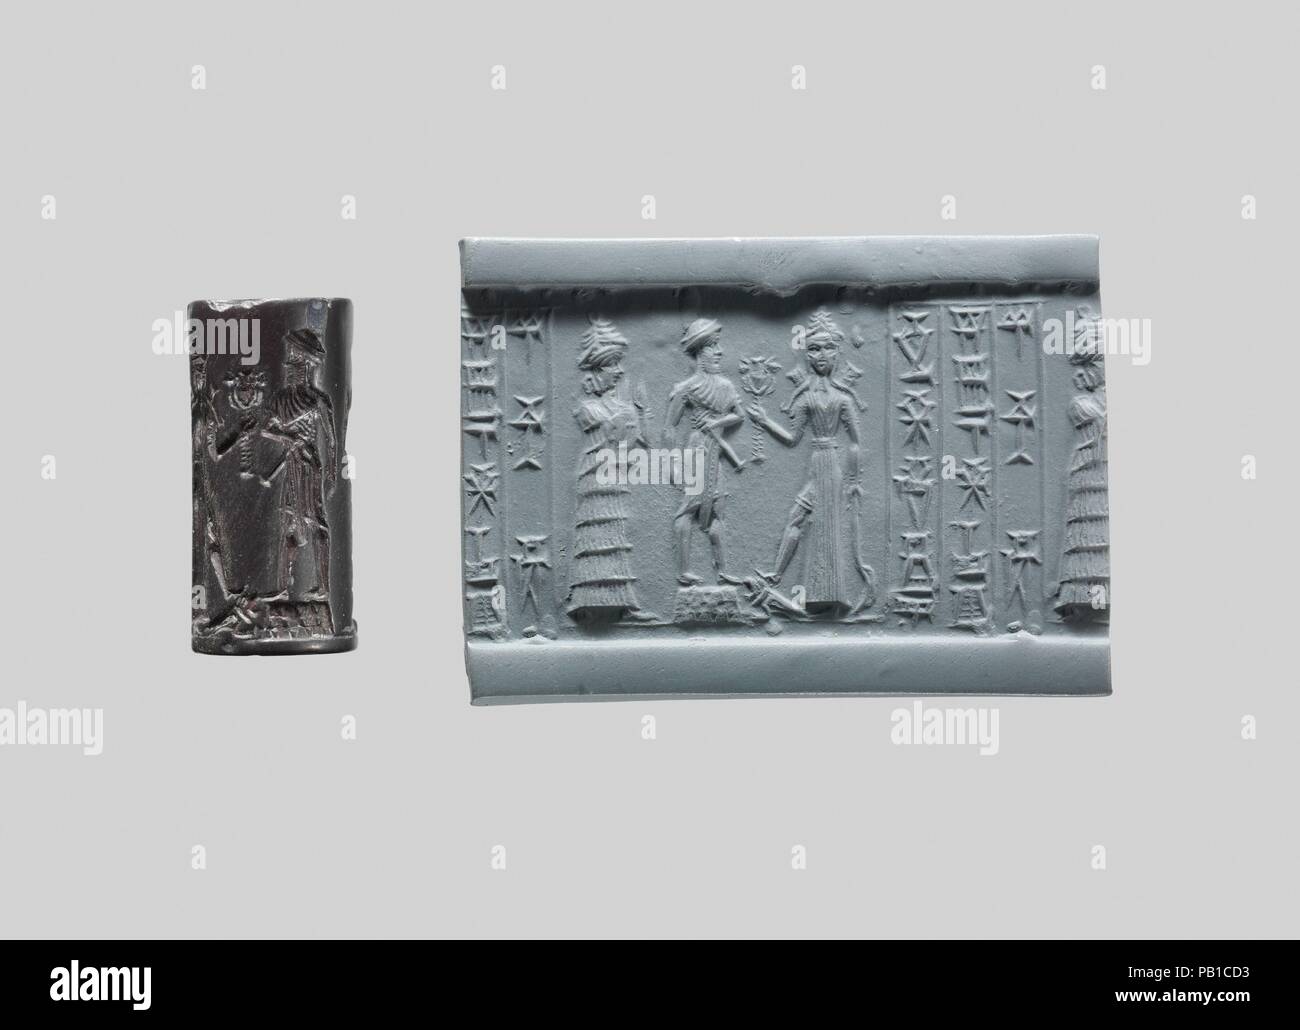 Cylinder seal. Culture: Babylonian. Dimensions: 0.94 in. (2.39 cm). Date: ca. 18th-17th century B.C..  Although engraved stones had been used as early as the seventh millennium B.C. to stamp impressions in clay, the invention in the fourth millennium B.C. of carved cylinders that could be rolled over clay allowed the development of more complex seal designs. These cylinder seals, first used in Mesopotamia, served as a mark of ownership or identification. Seals were either impressed on lumps of clay that were used to close jars, doors, and baskets, or they were rolled onto clay tablets that rec Stock Photo